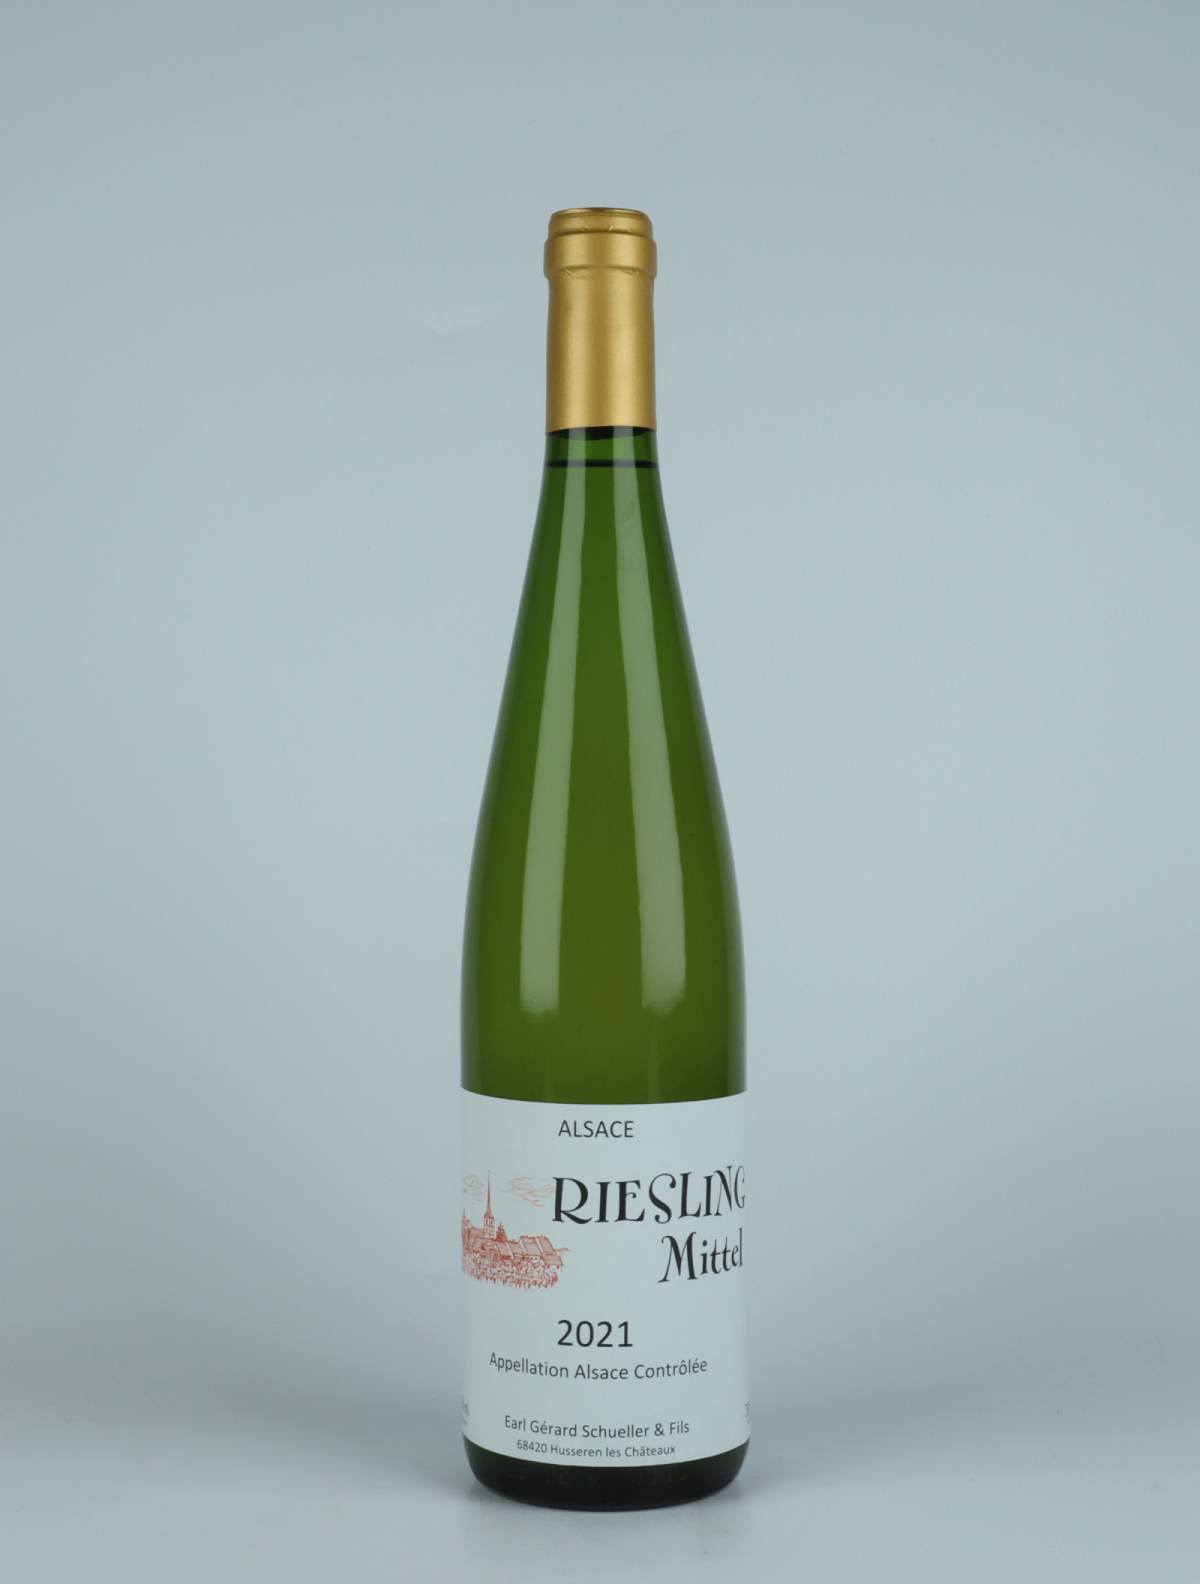 A bottle 2021 Riesling - Mittel White wine from Gérard Schueller, Alsace in France